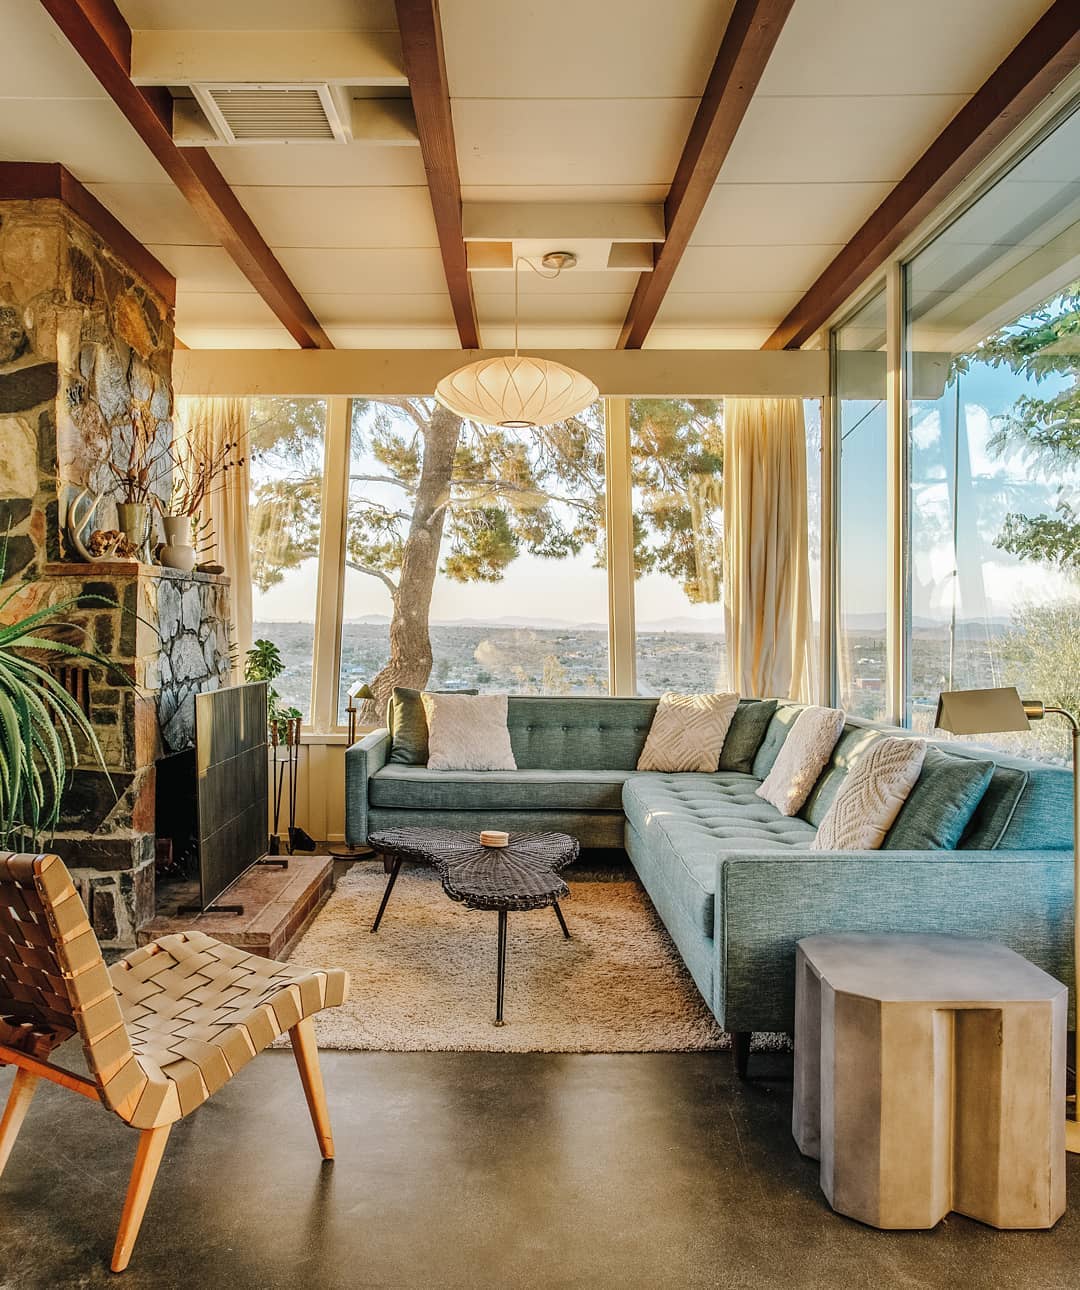 Home with Large Windows Surrounding Living Room Looking Out to the Yucca Valley. Photo by Instagram user @jtreebnb